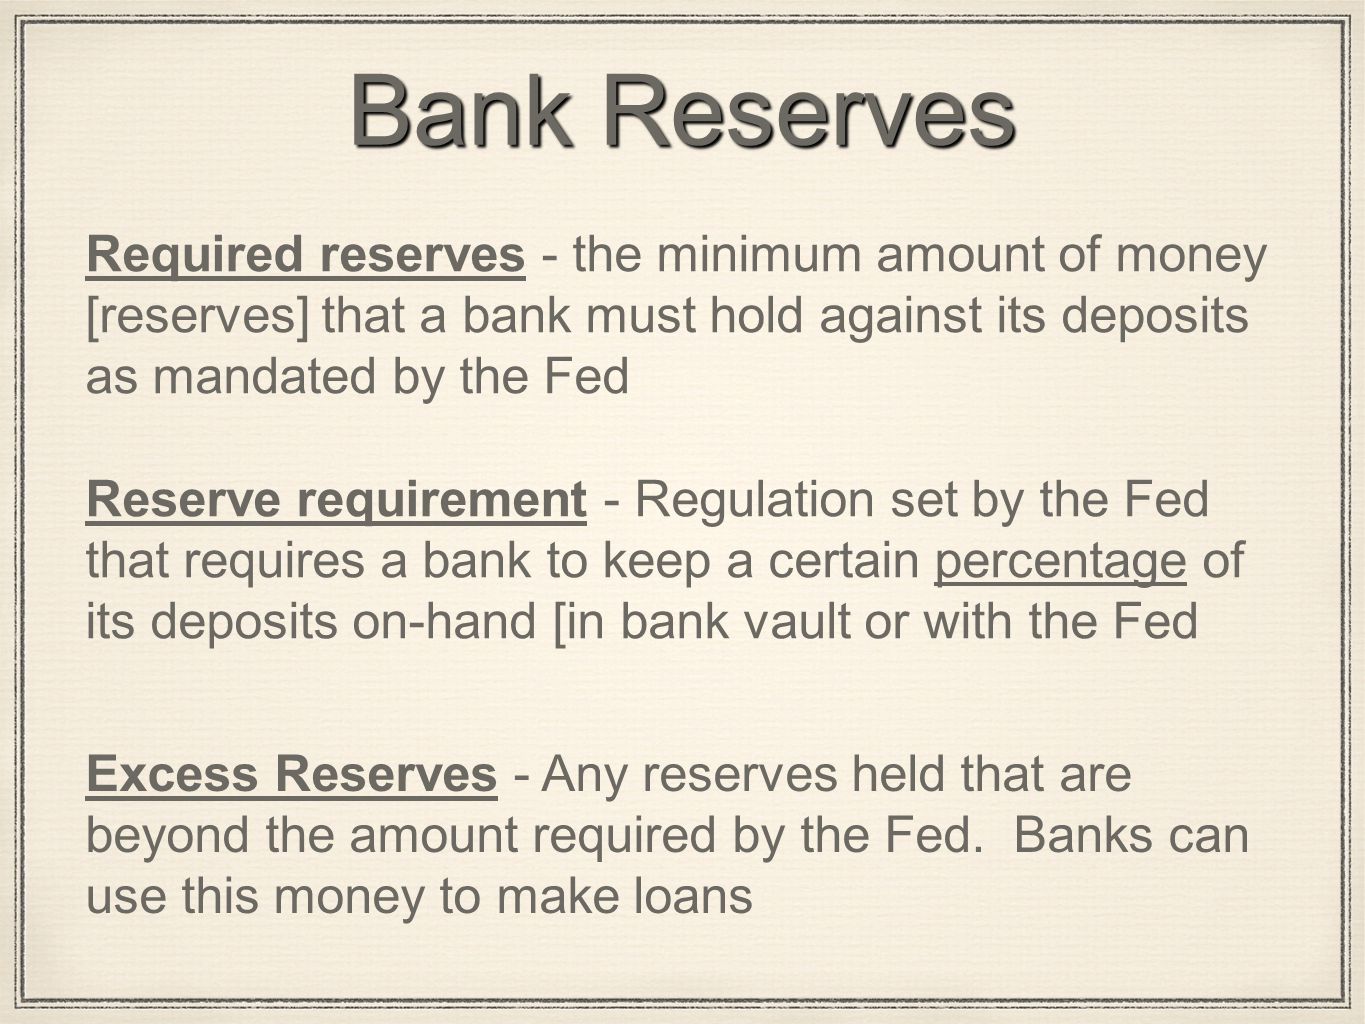 Bank Reserves Required reserves - the minimum amount of money [reserves] that a bank must hold against its deposits as mandated by the Fed Reserve requirement - Regulation set by the Fed that requires a bank to keep a certain percentage of its deposits on-hand [in bank vault or with the Fed Excess Reserves - Any reserves held that are beyond the amount required by the Fed.